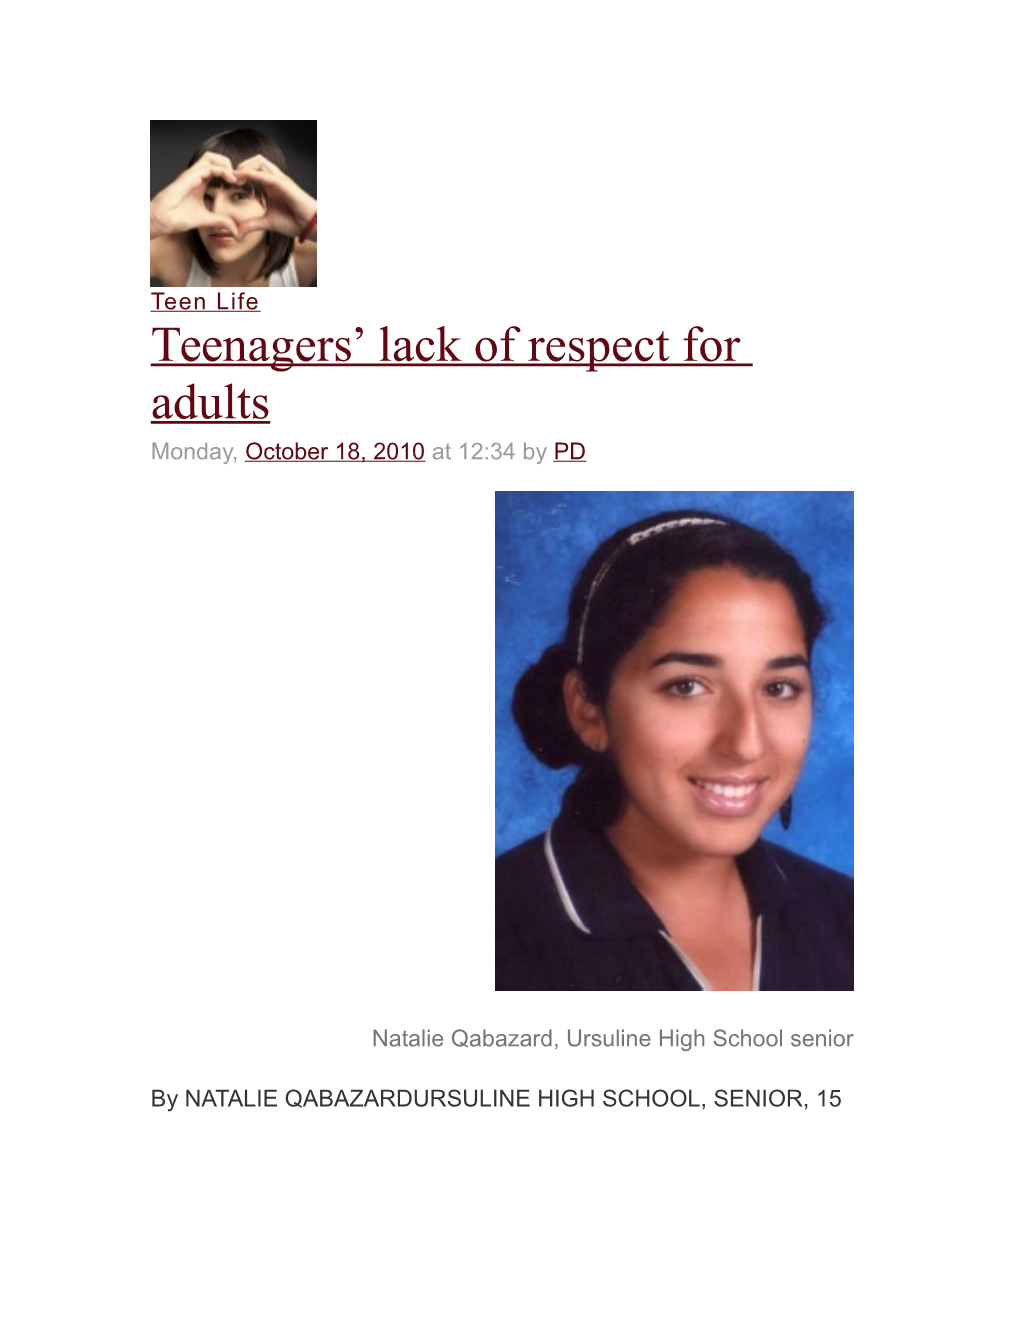 Teenagers Lack of Respect for Adults